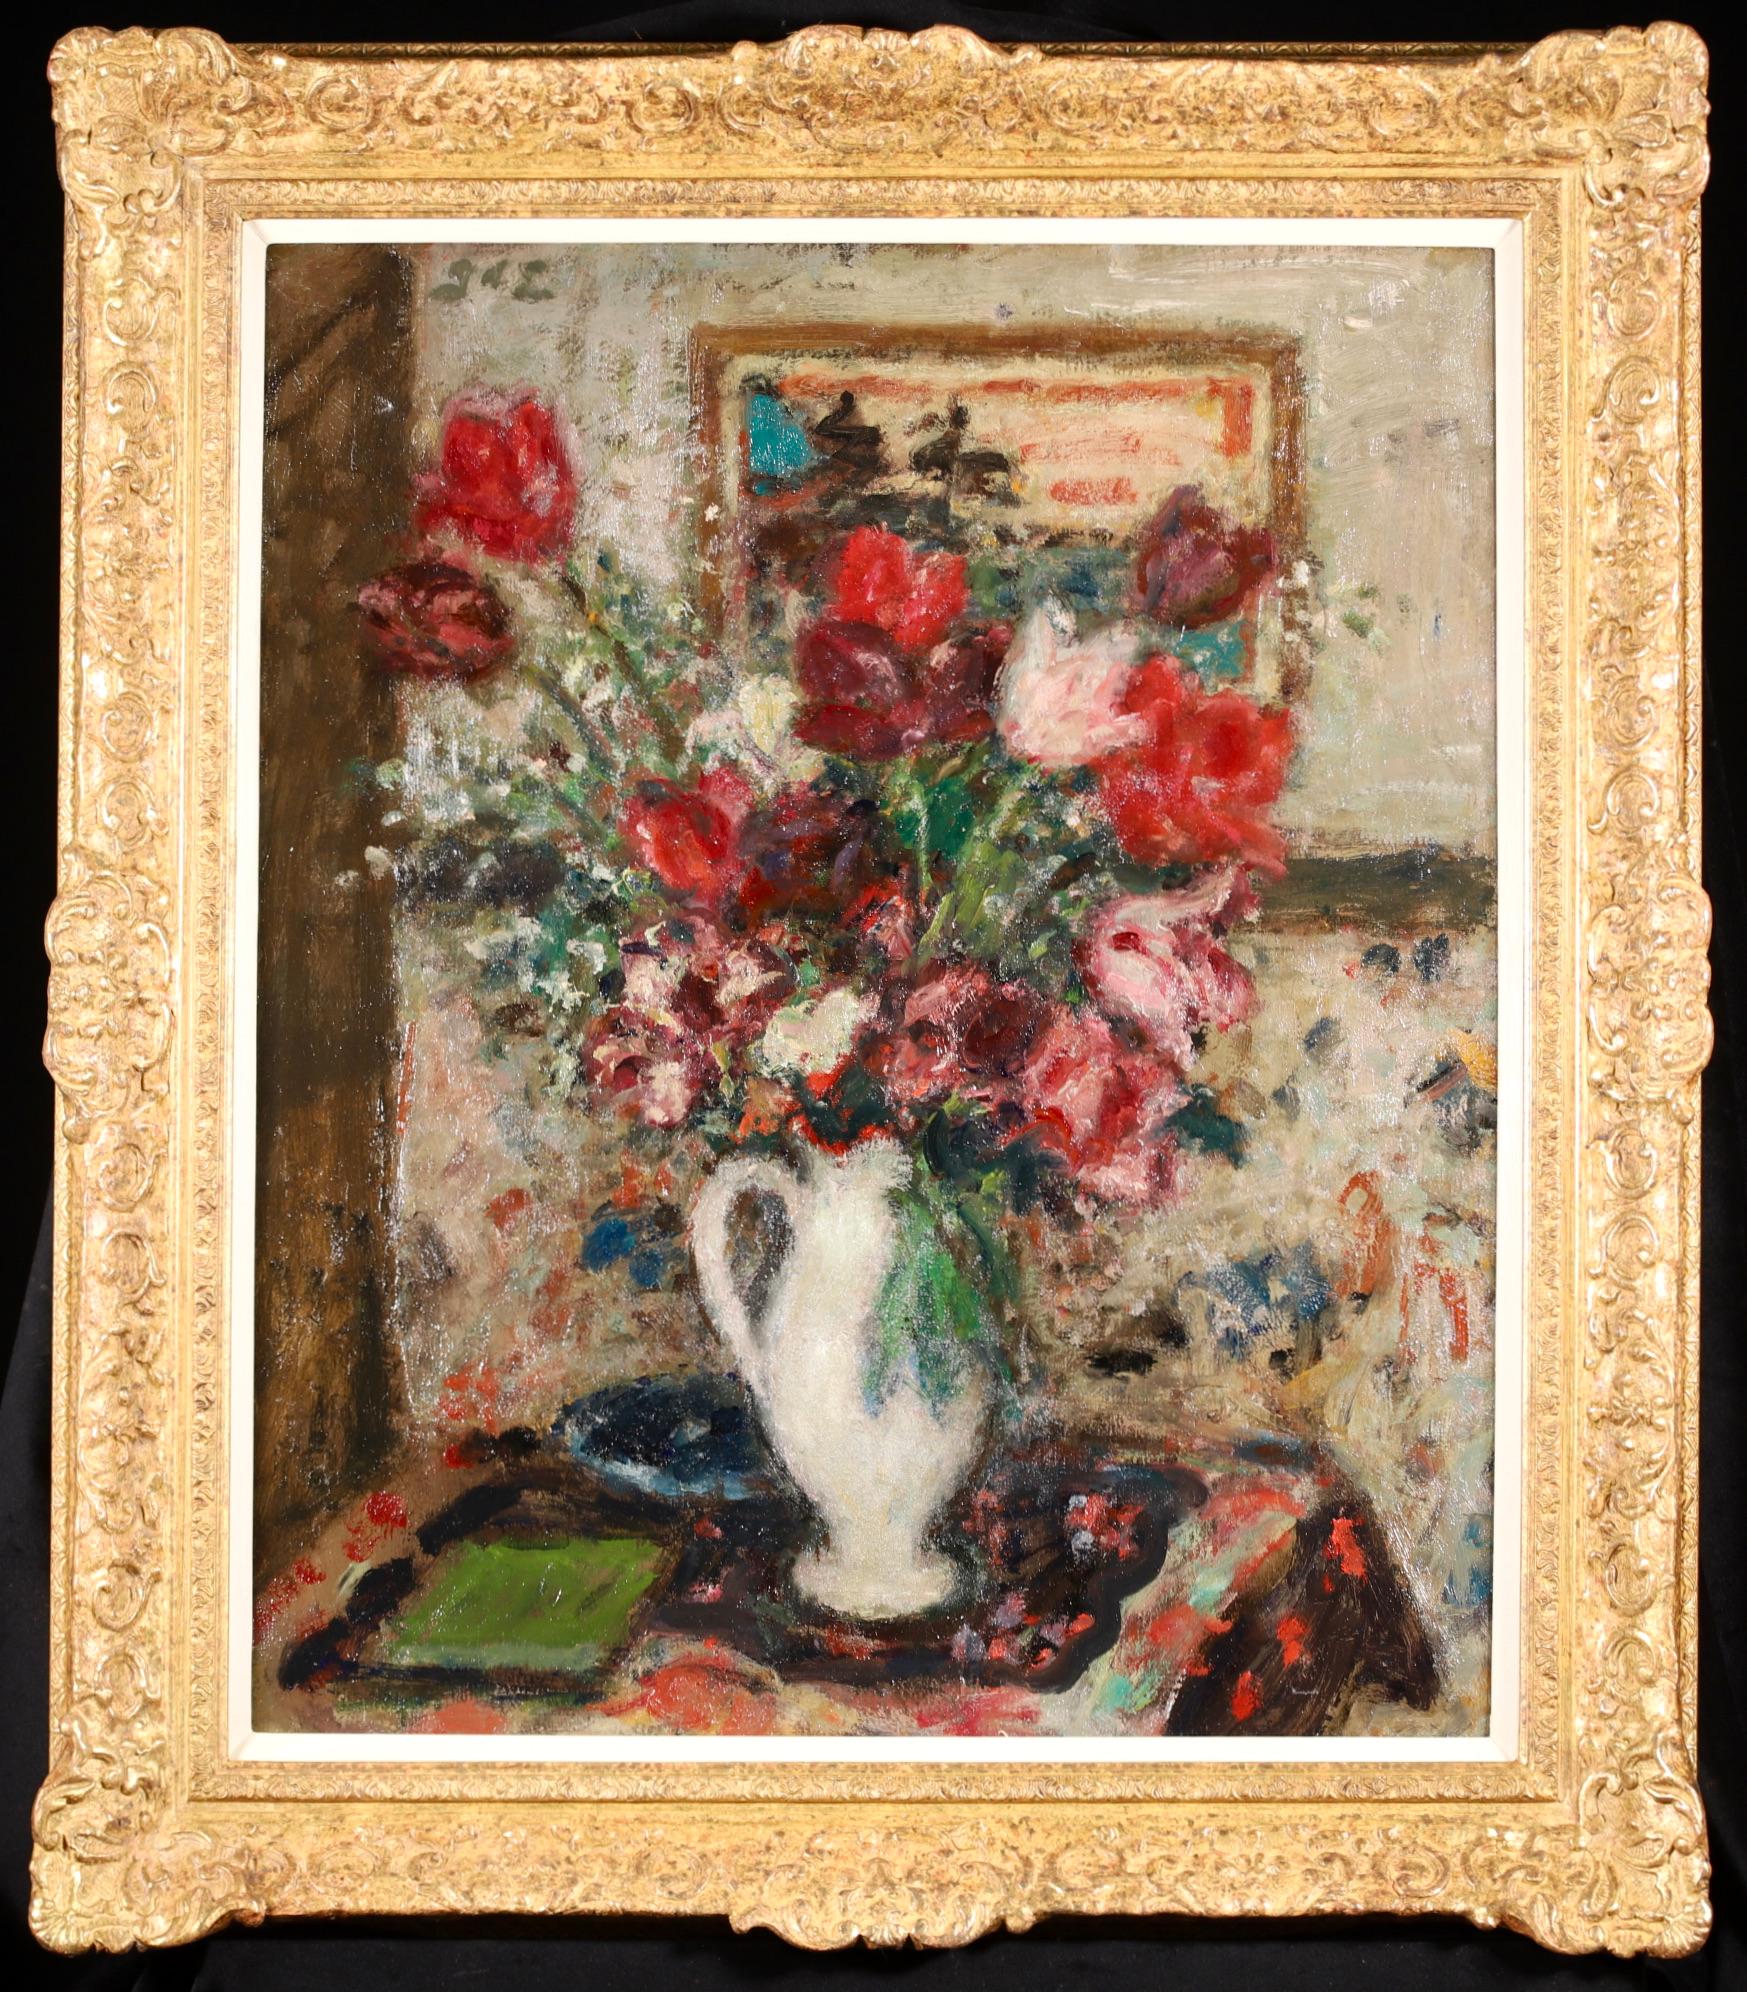 Signed still life oil on canvas circa 1920 by French post impressionist painter Georges D'Espagnat. The work depicts a white vase filled with red and white tulips. A beautiful piece in the artist's distinctive hand.

Signature:
Signed upper